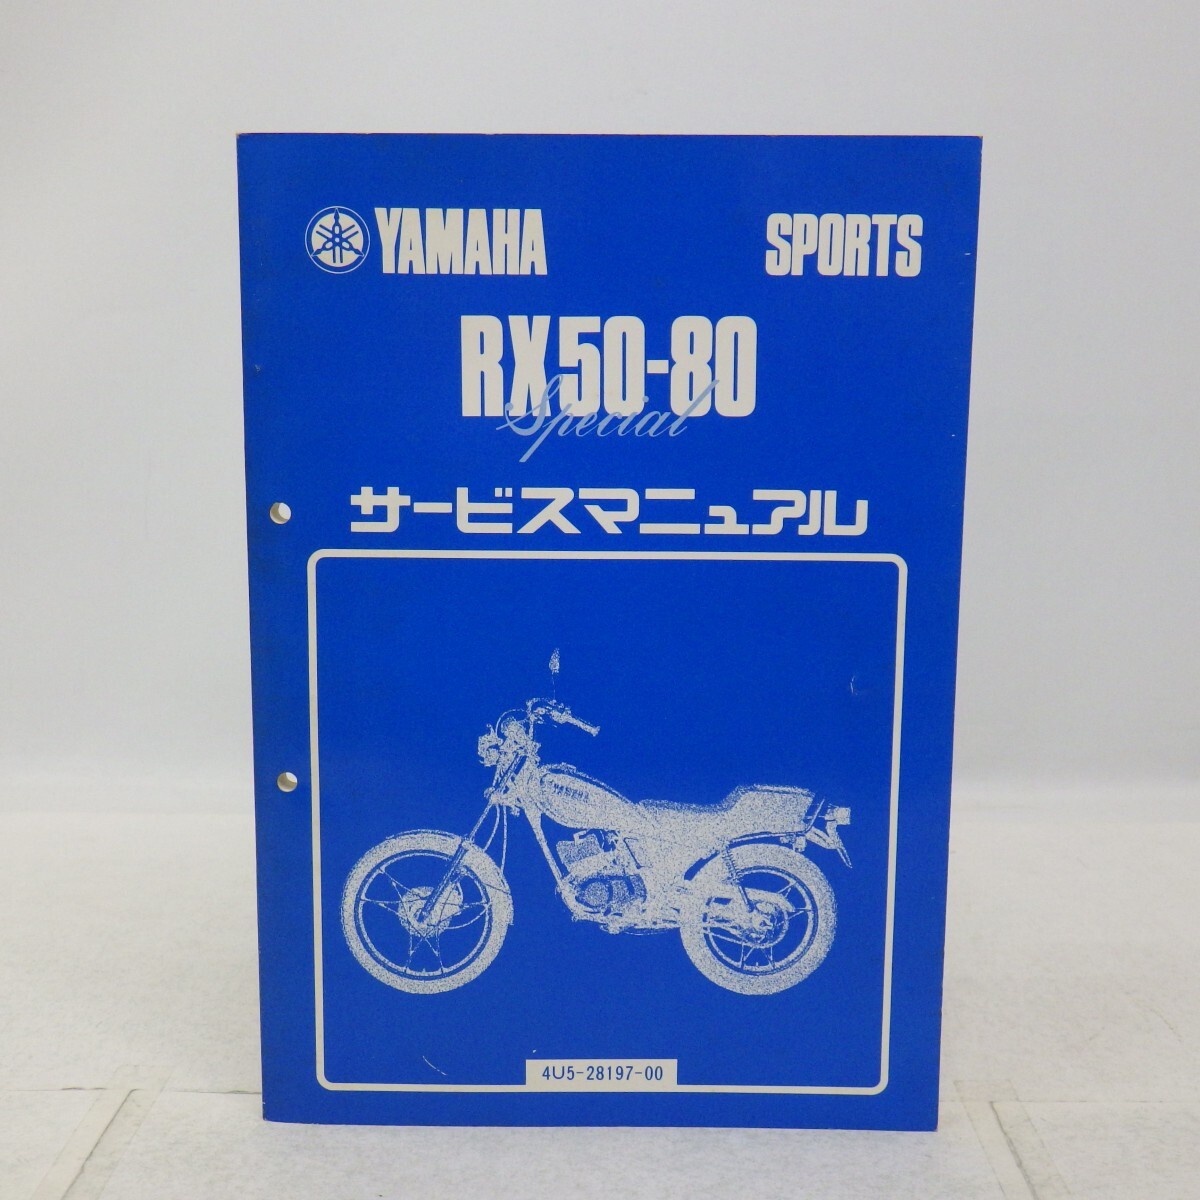  Yamaha [RX50-80 Special] service manual /4U5/ wiring diagram equipped /YAMAHA SPORTS RX 50-80 special / bike motorcycle service book L